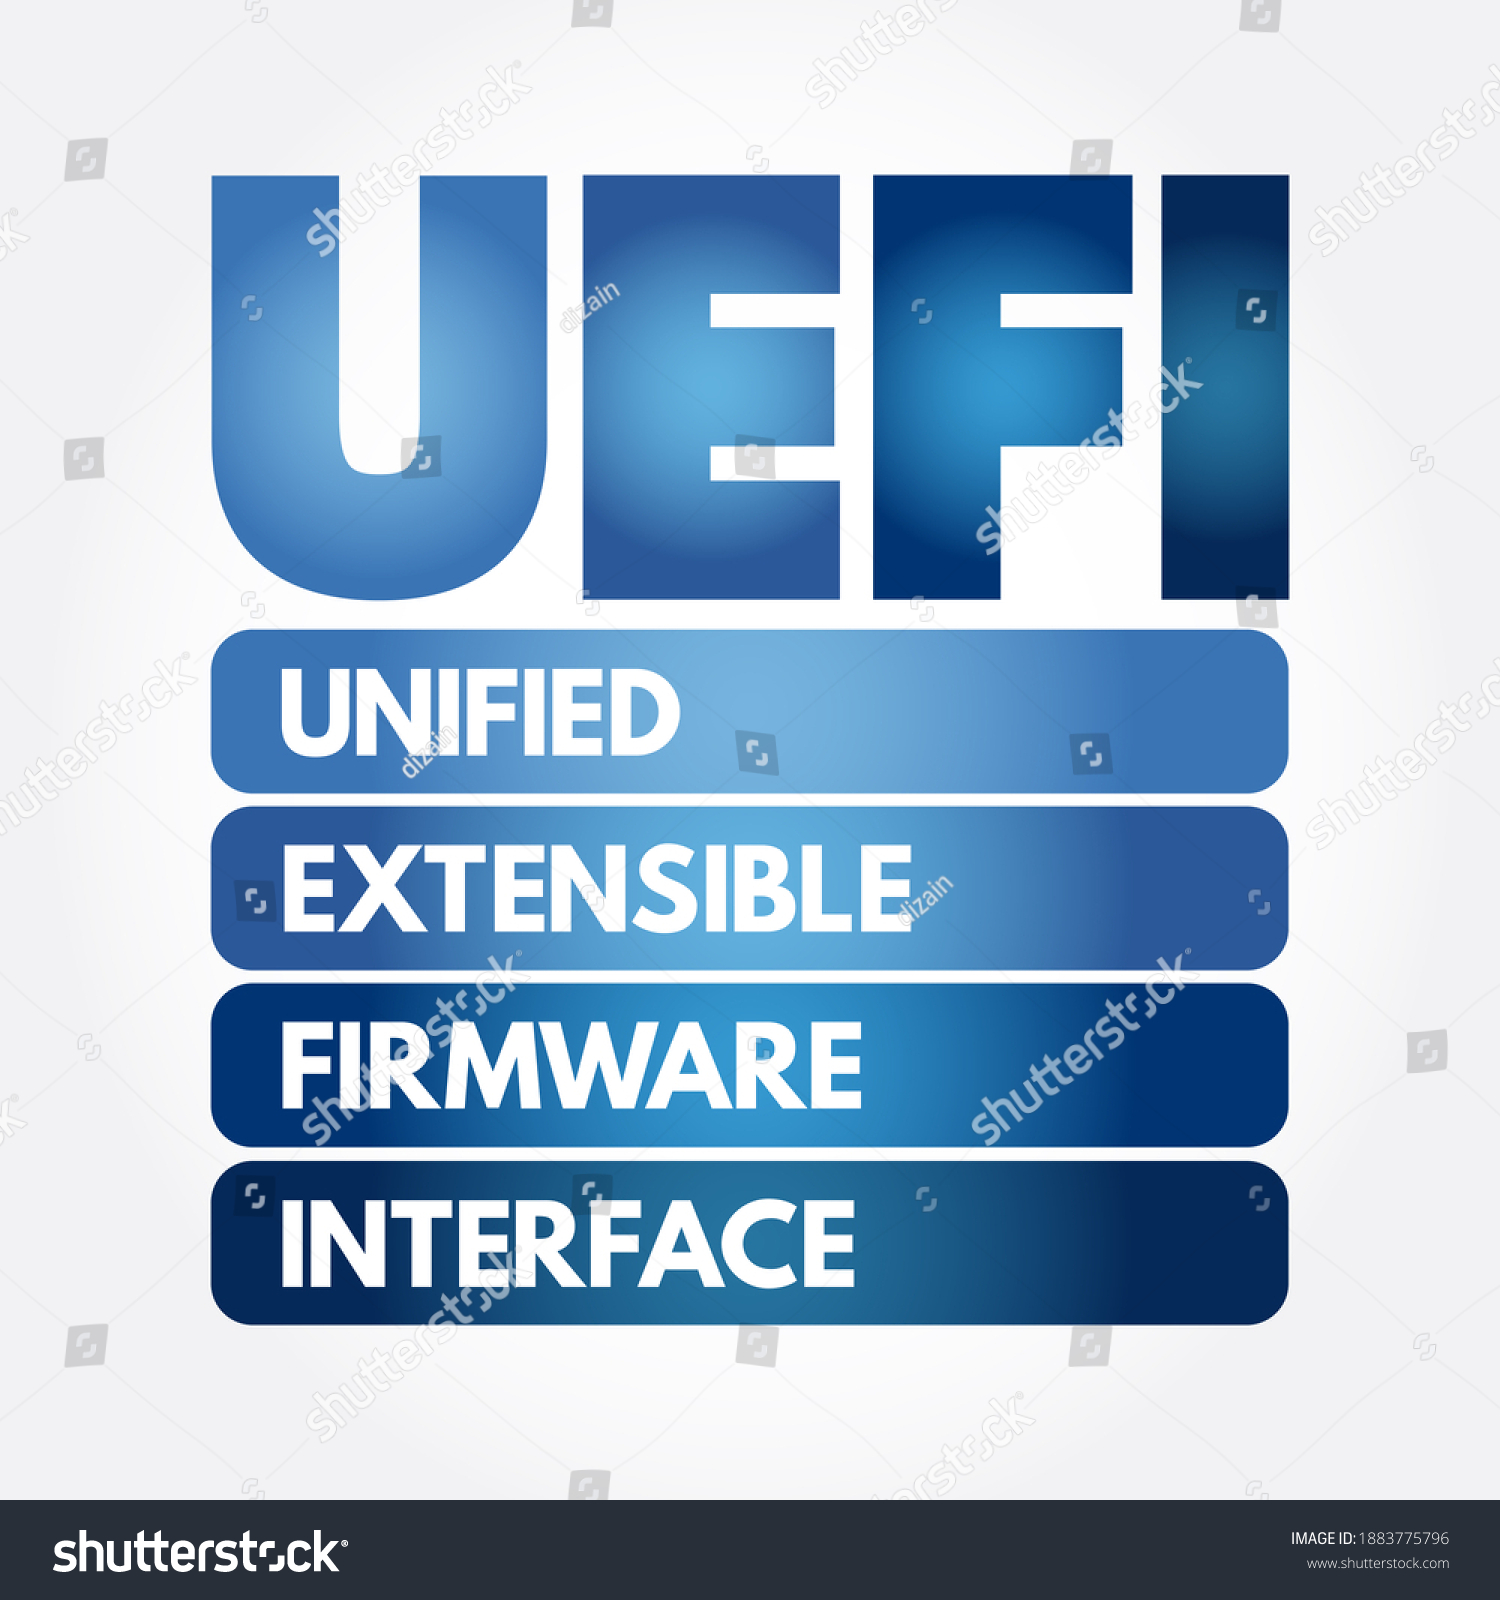 UEFI Unified Extensible Firmware Interface - publicly available specification that defines a software interface between an operating system and platform firmware, acronym text concept background #1883775796